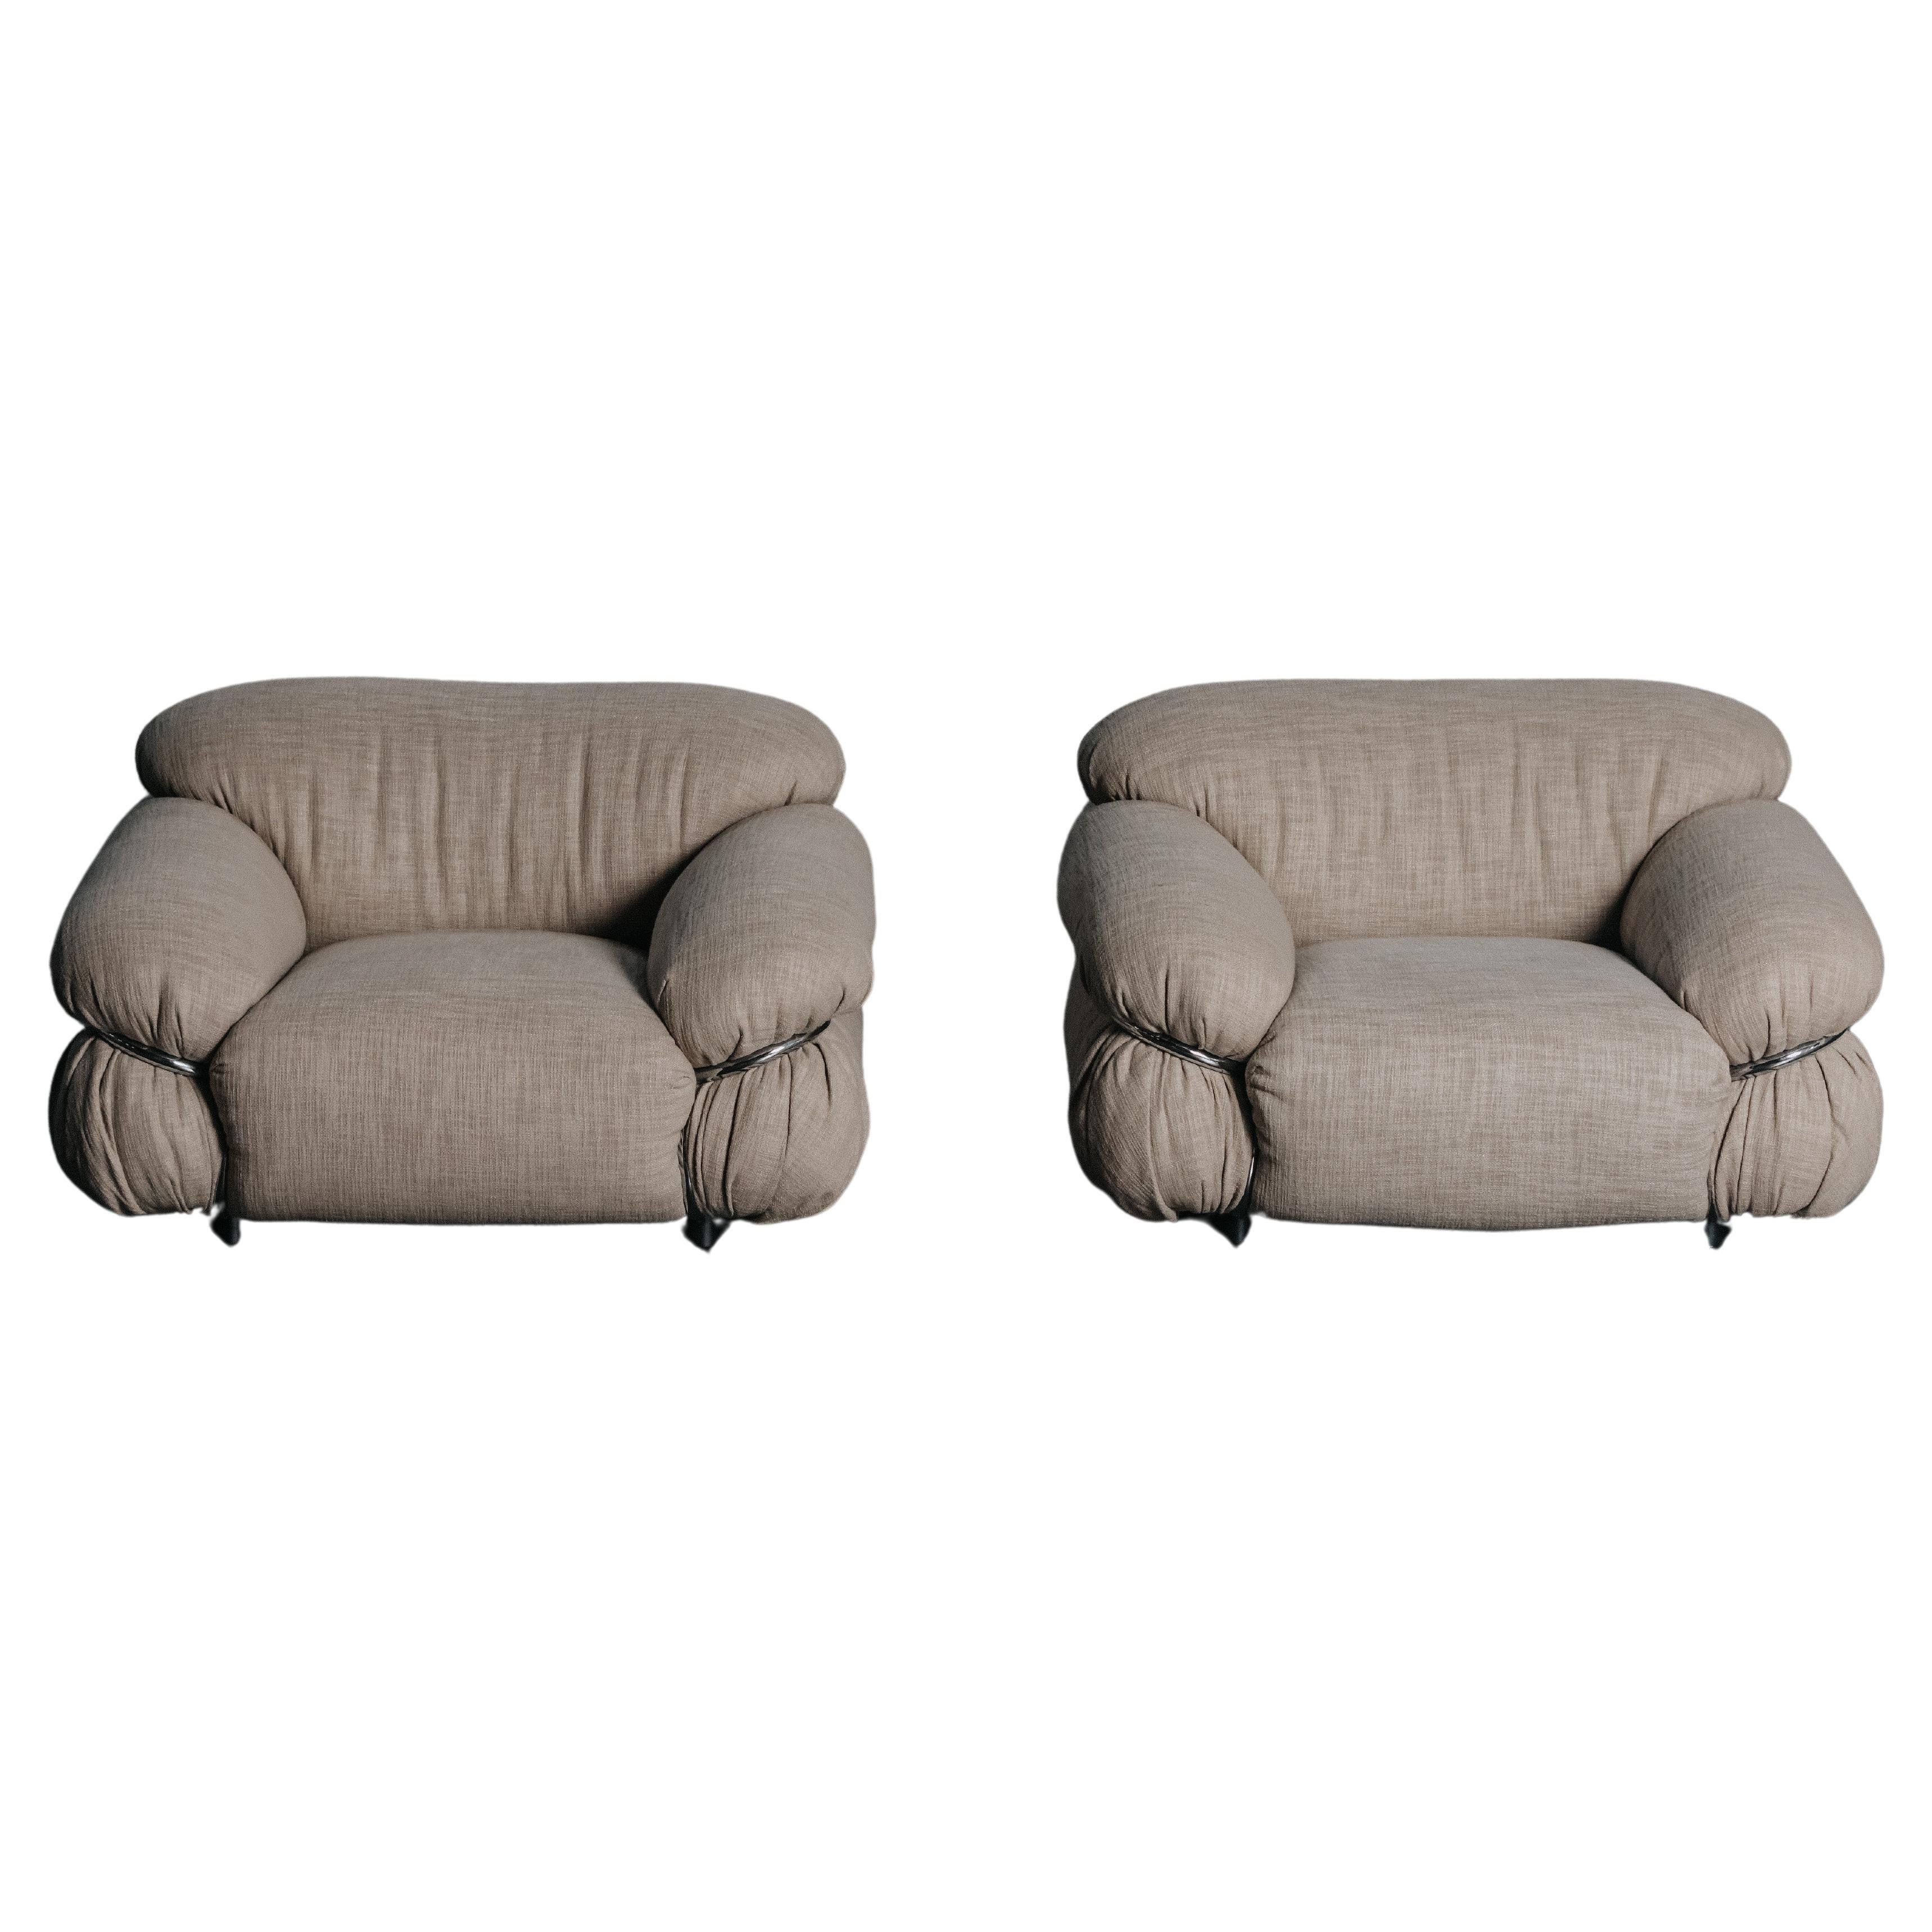 Vintage Pair Of Lounge Chairs by Gianfranco Frattini for Cassina, 1972